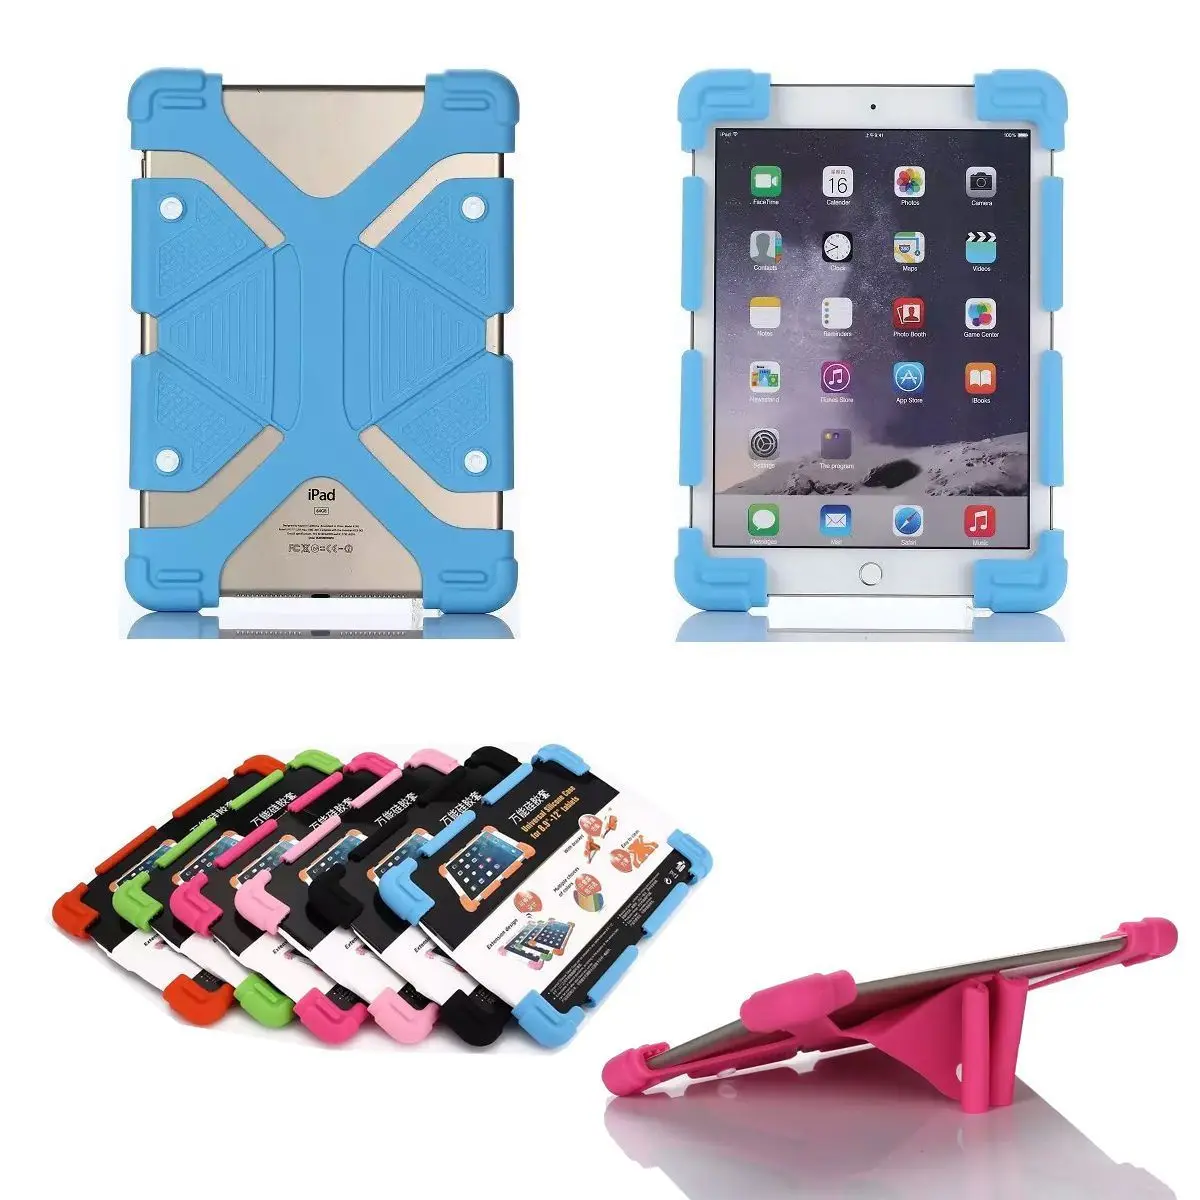  Universal Shockproof Silicone Soft Stand Case Cover For 7" Acer Iconia ONE 7 B1-750 Android Tablet 